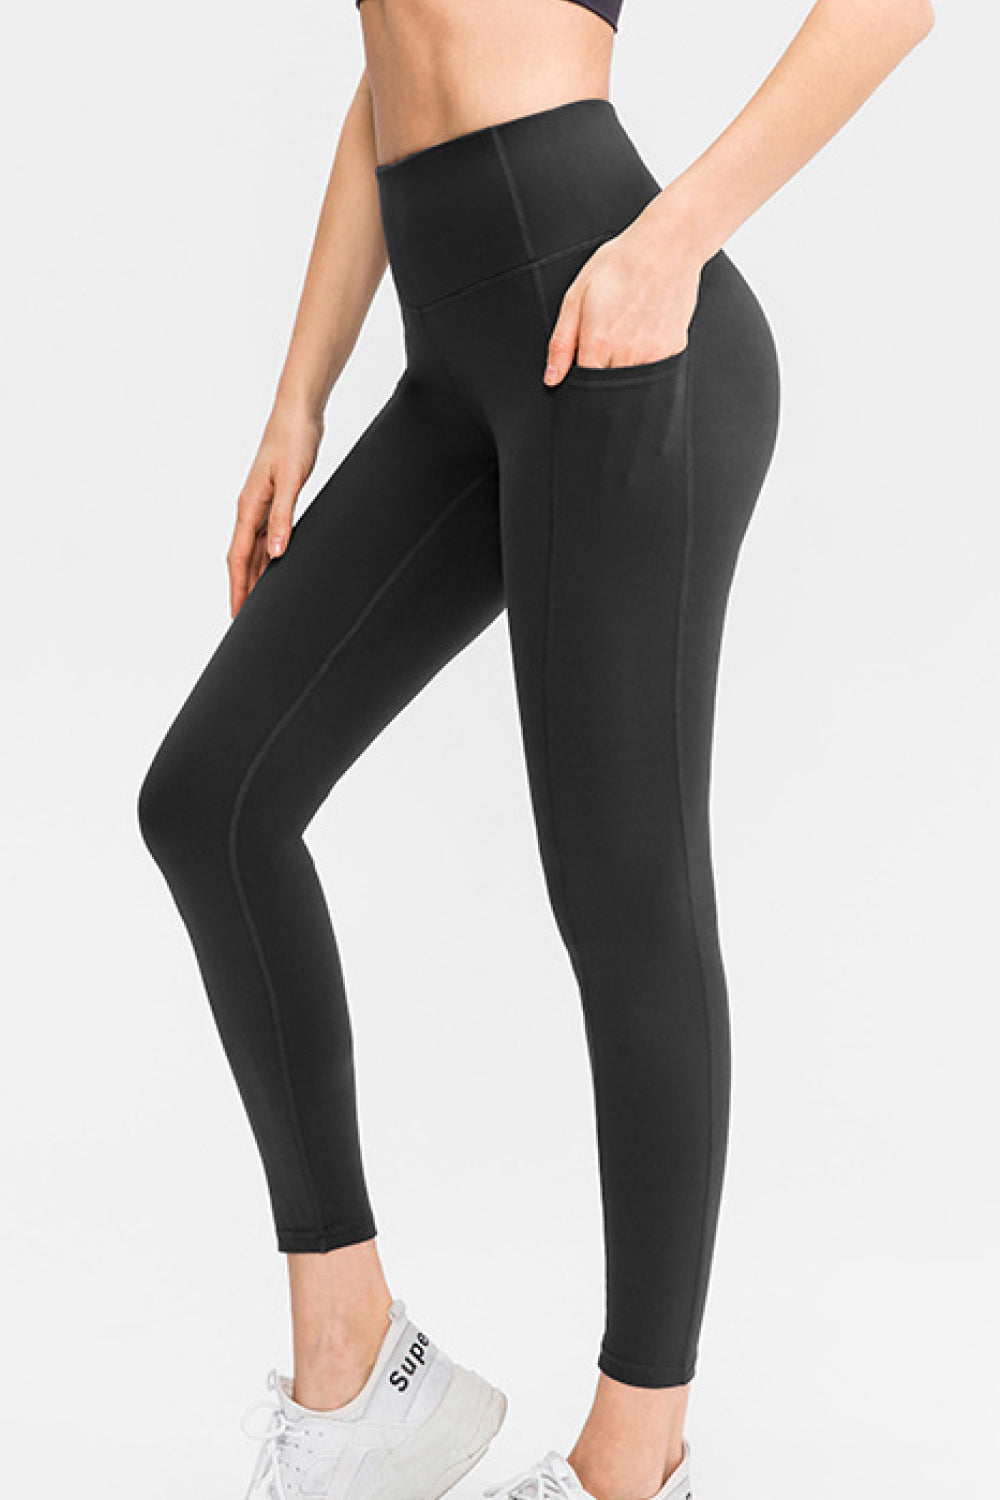 High Waist Ankle-Length Sports Leggings with Pockets - PINKCOLADA